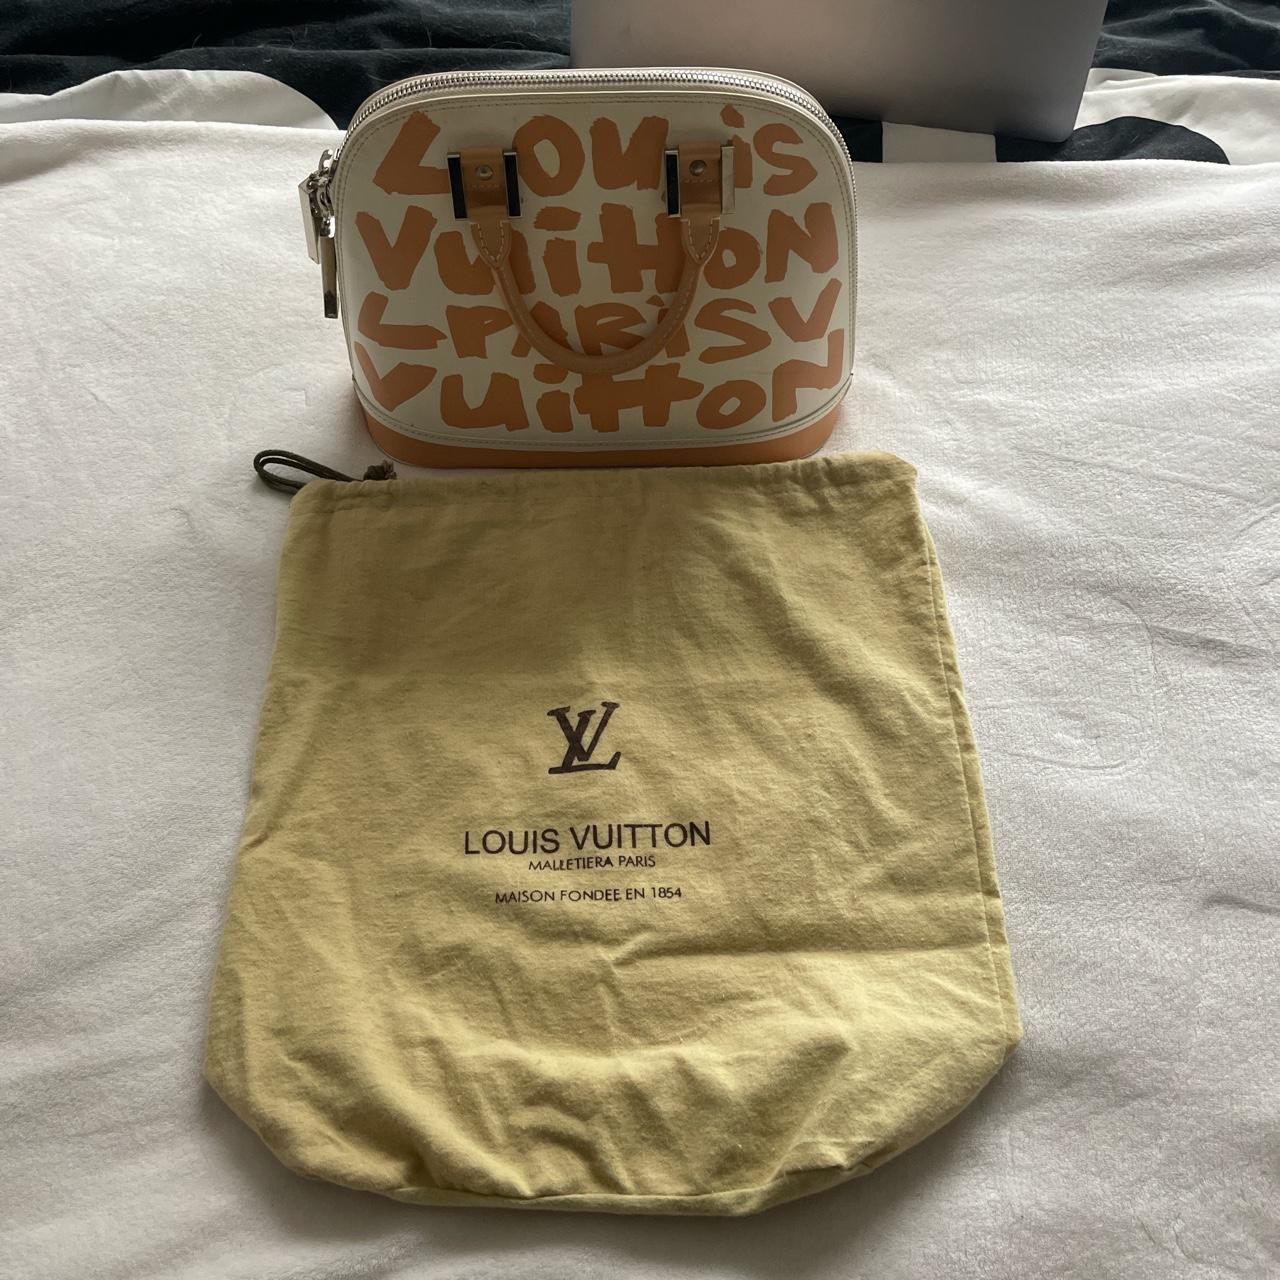 Louis Vuitton x Stephen Sprouse 2001 pre-owned Alma - Depop